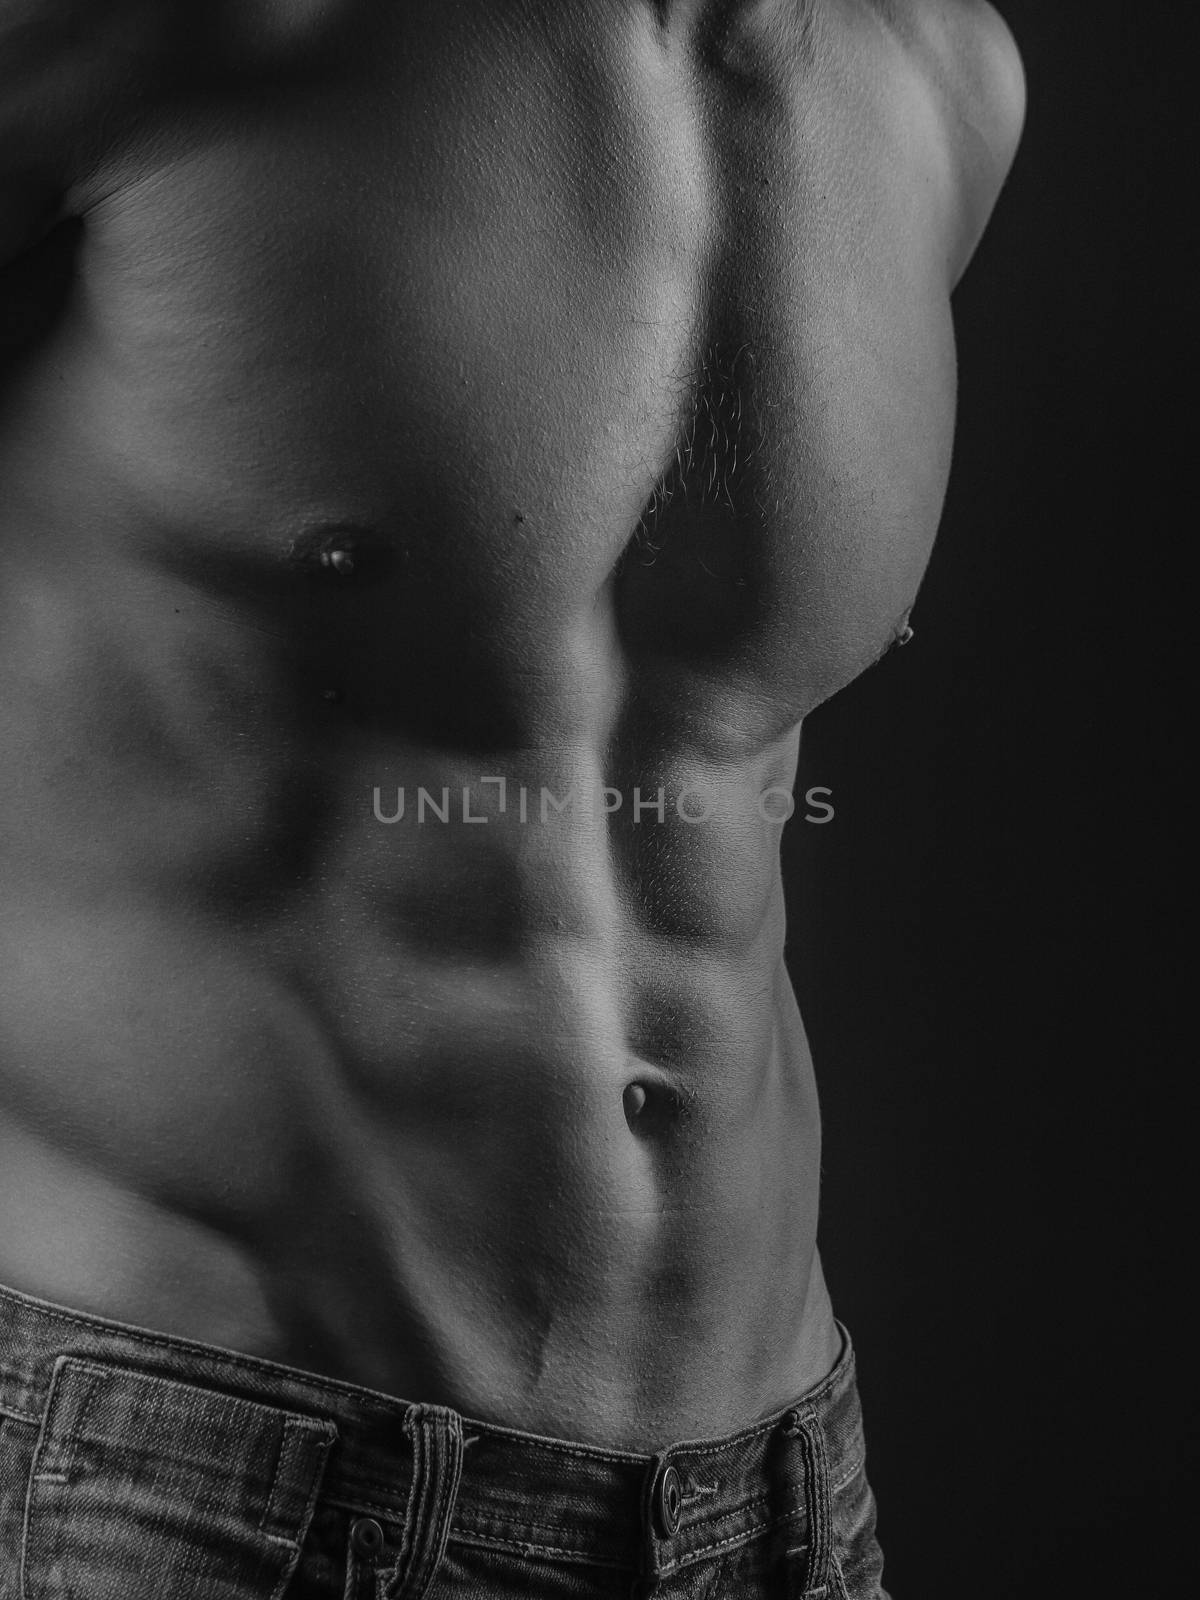 Abdominal muscles of a fit young man by Alex_L